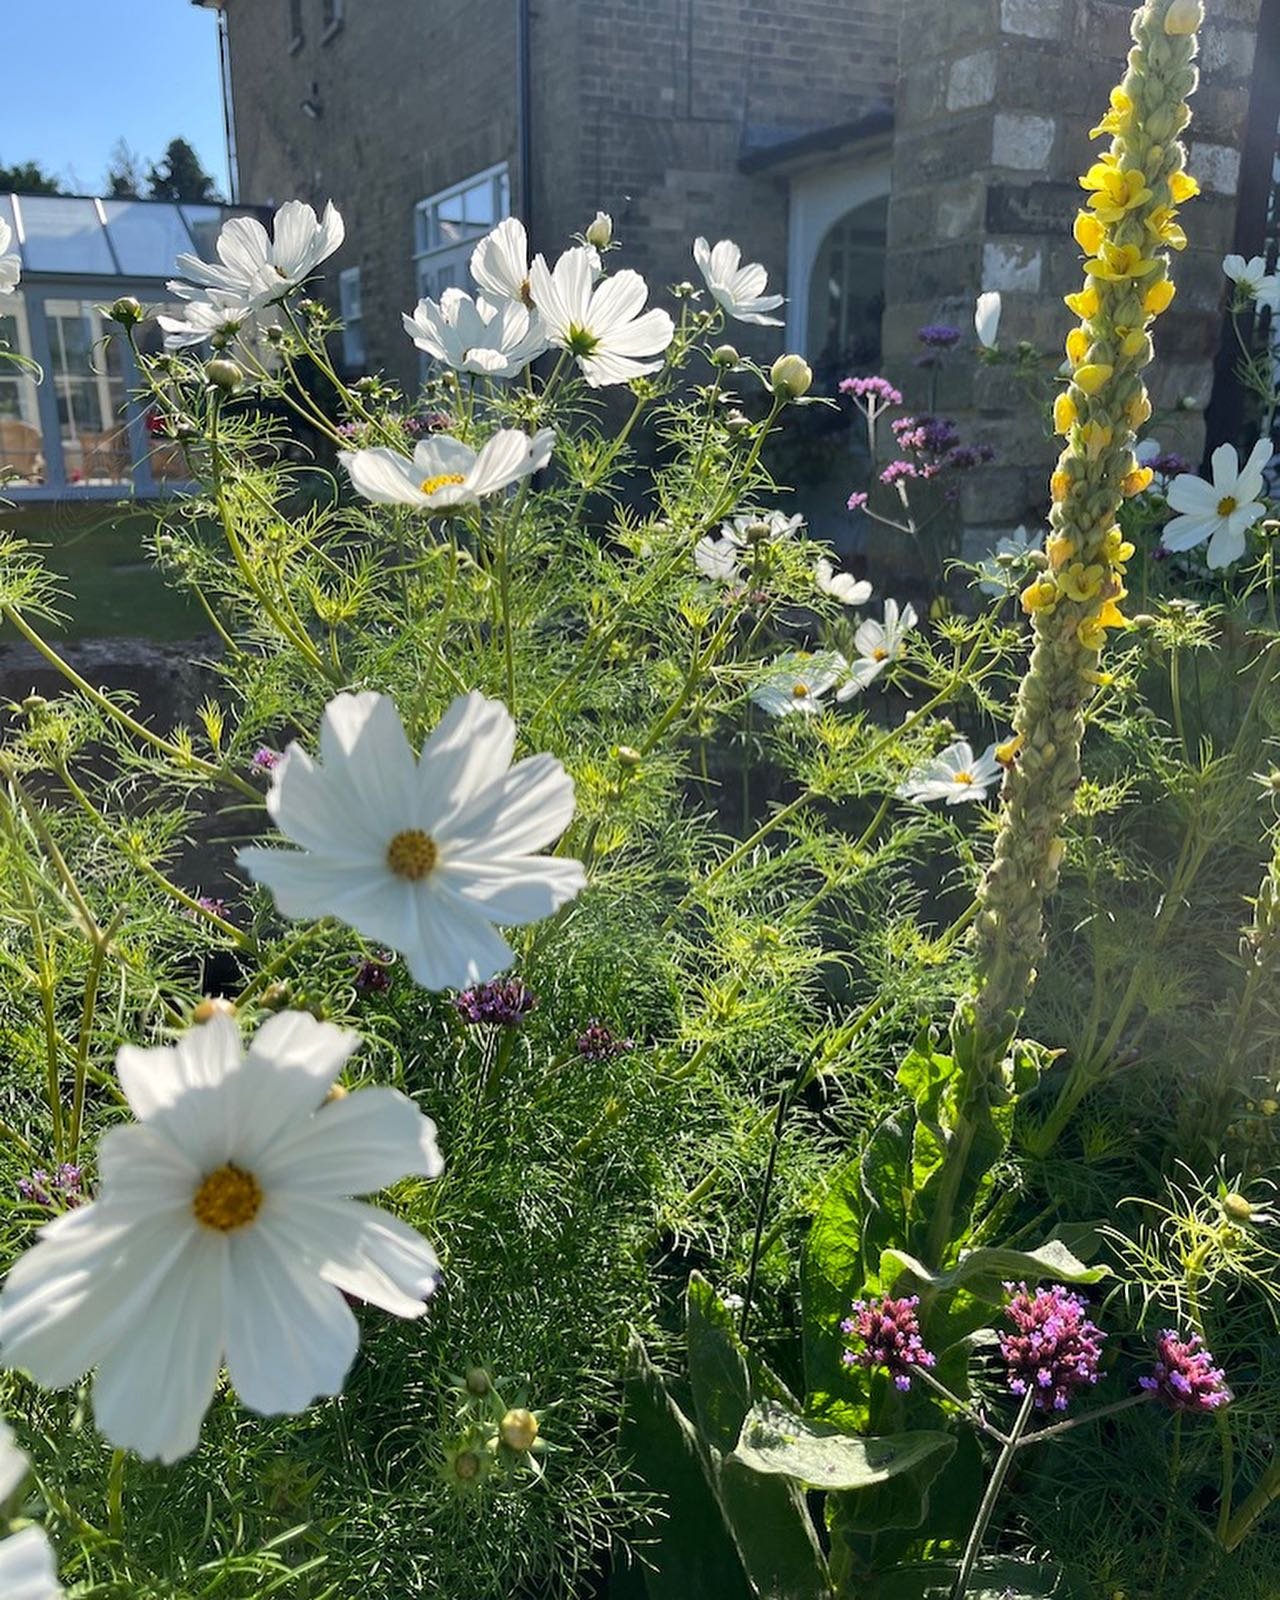 Capturing the joy of mid summer: the fun of growing hardy and half hardy annuals 🌱🌱🌱🌱🌱

Reasons to do it:

Butterflies and bees will love it

You can cut flowers to make homemade bouquets for the house and to encourage a succession of flowers

S